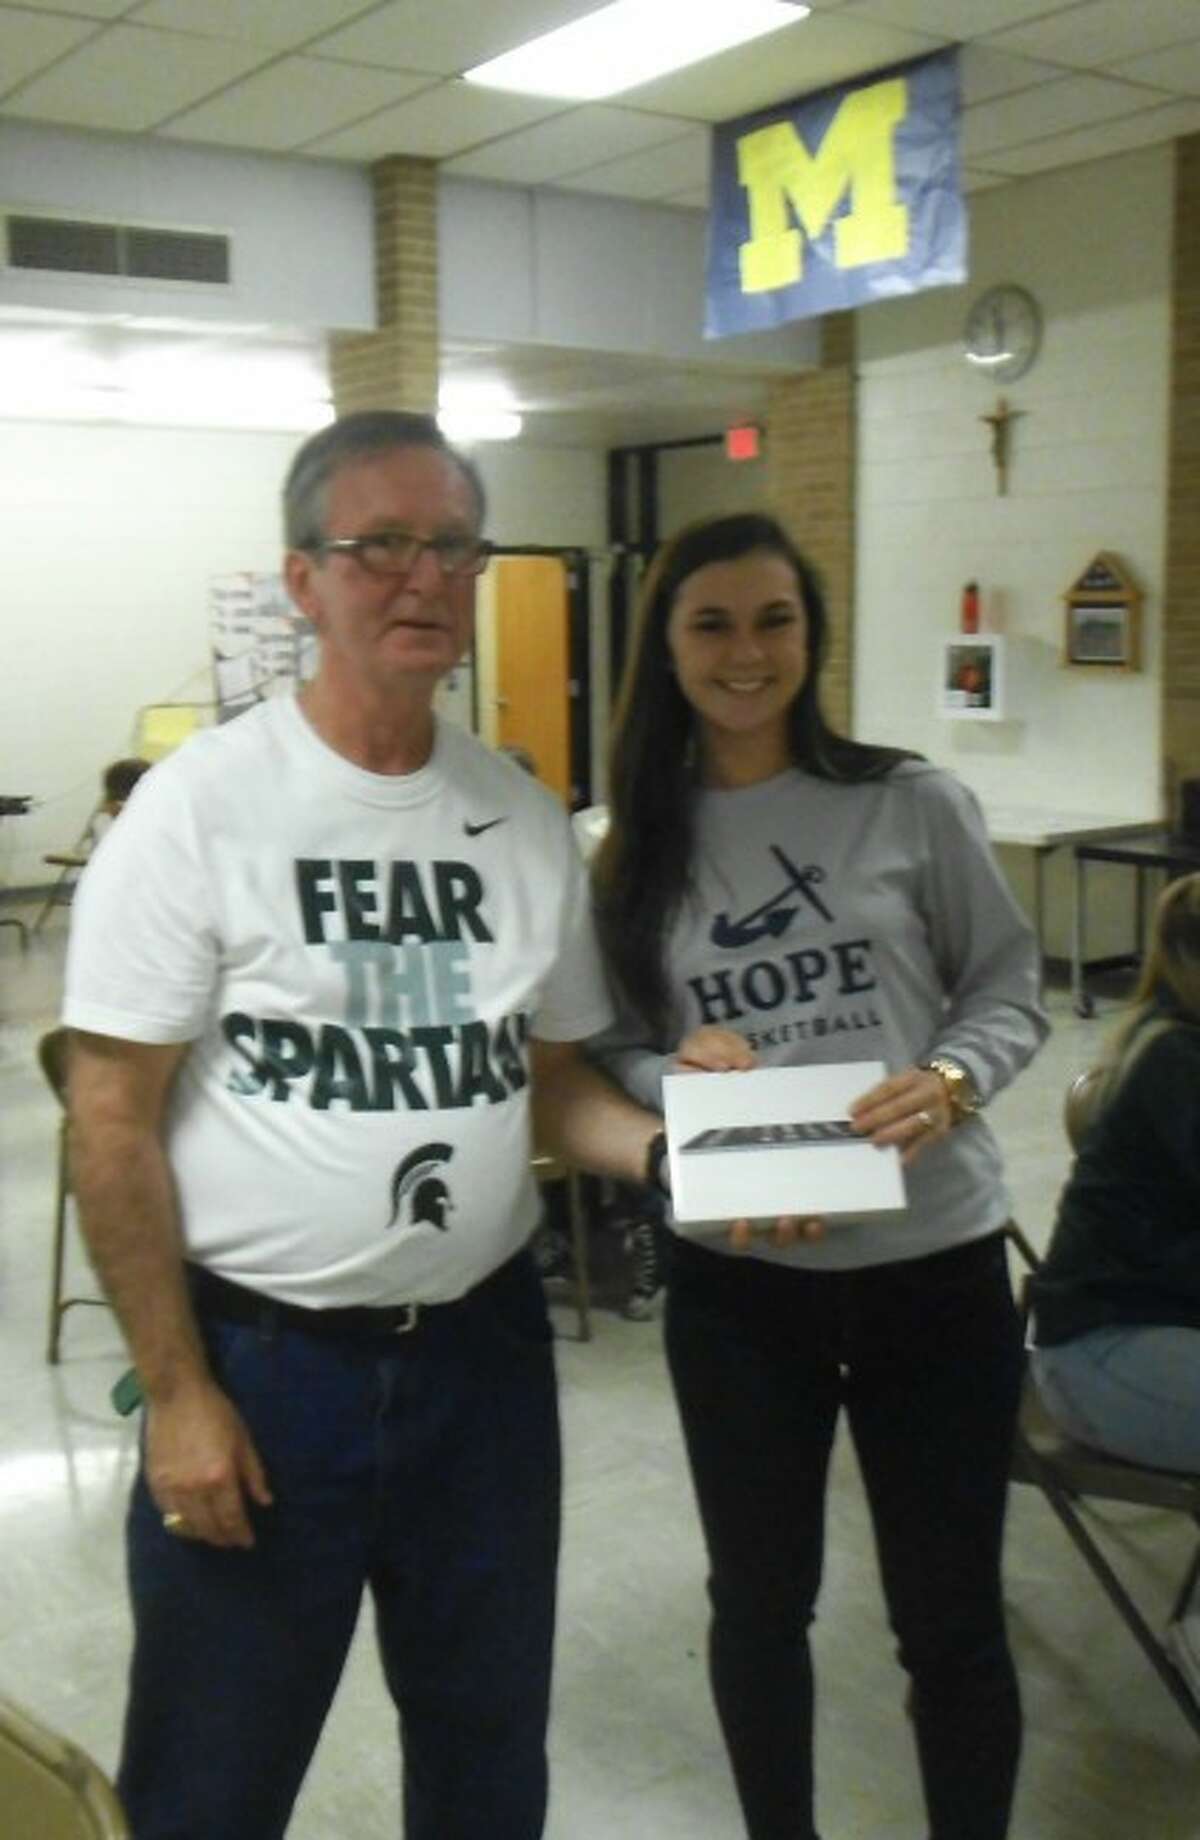 Manistee Catholic Central dean of students Ed Kolanowski presents Jodi Janowiak with the iPad mini she won in the drawing during College Application Week.